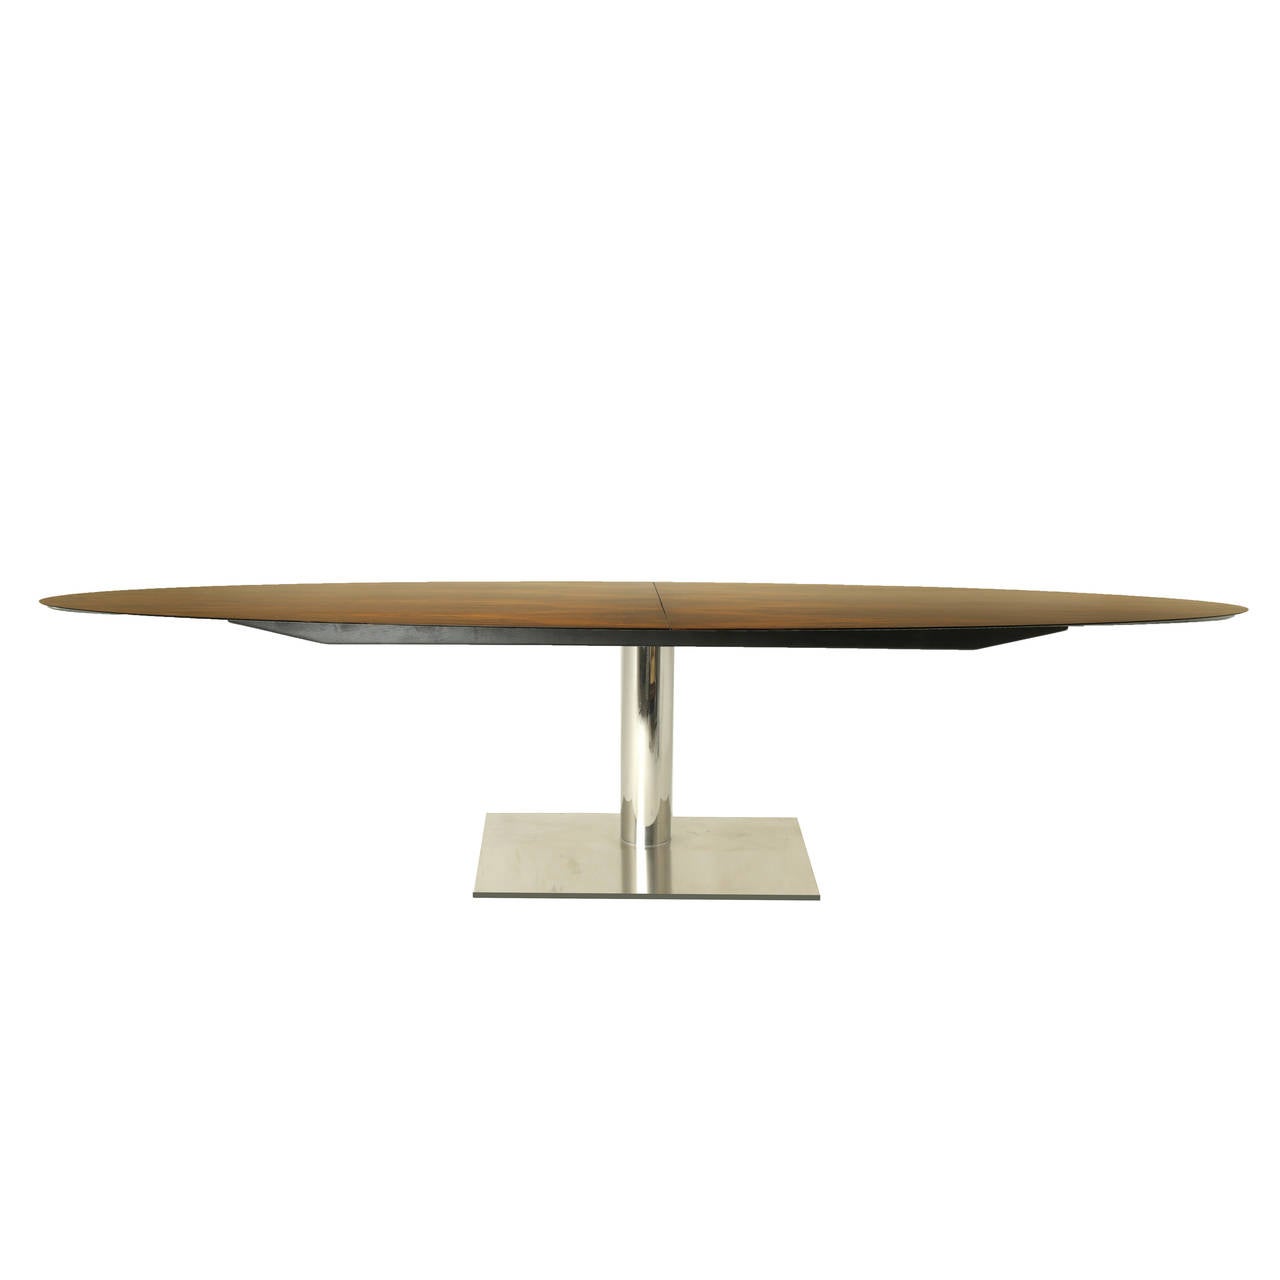 An elegant Brazilian Imbuia wood dining table from Brazil. The base is Stainless Steel. The base is sturdy and very stable. Grain on the Imbuia top is mirrored essentially. 

   